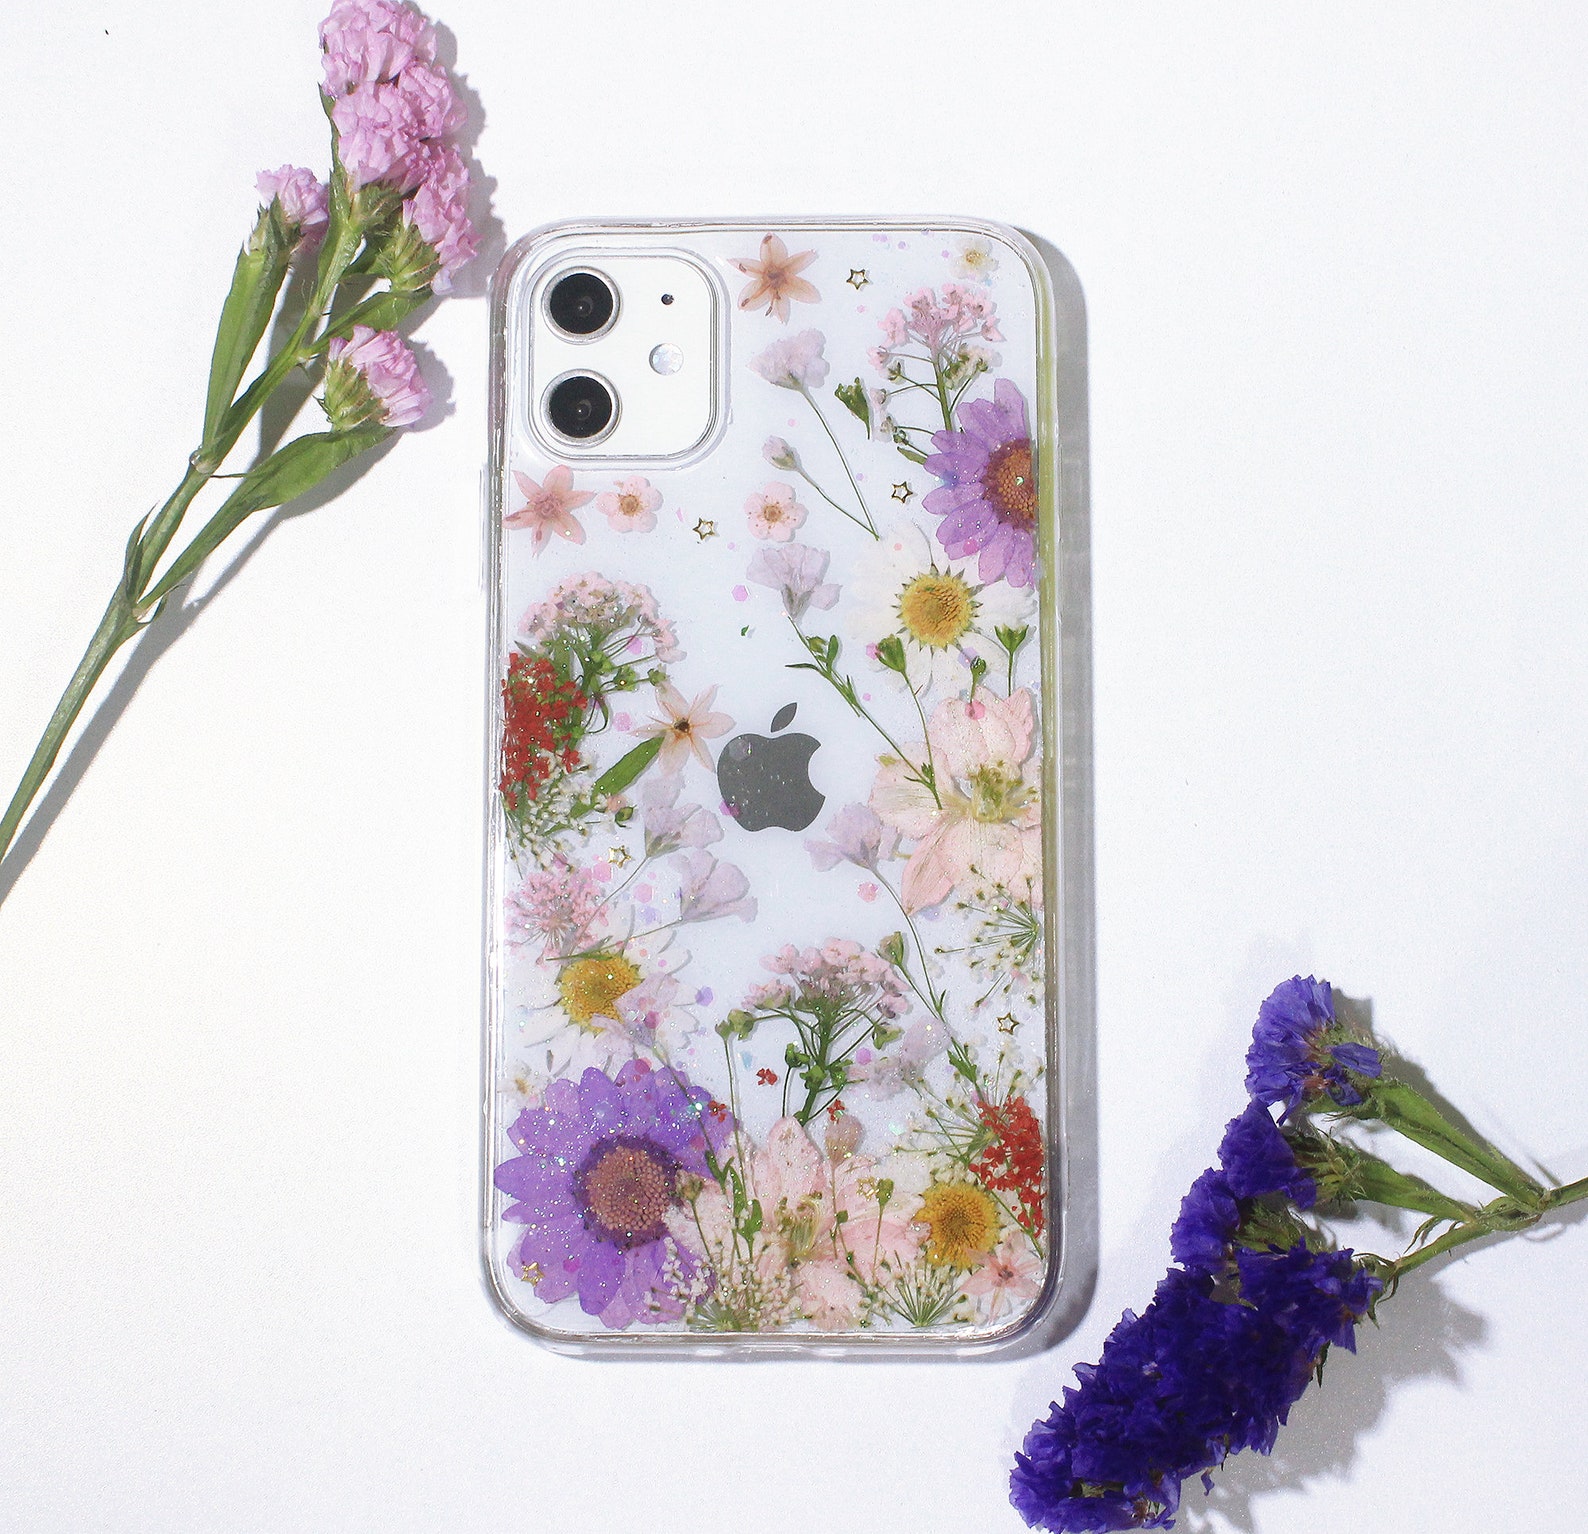 Pressed Flower Phone Case Iphone 11 Case Real Dried Floral Etsy